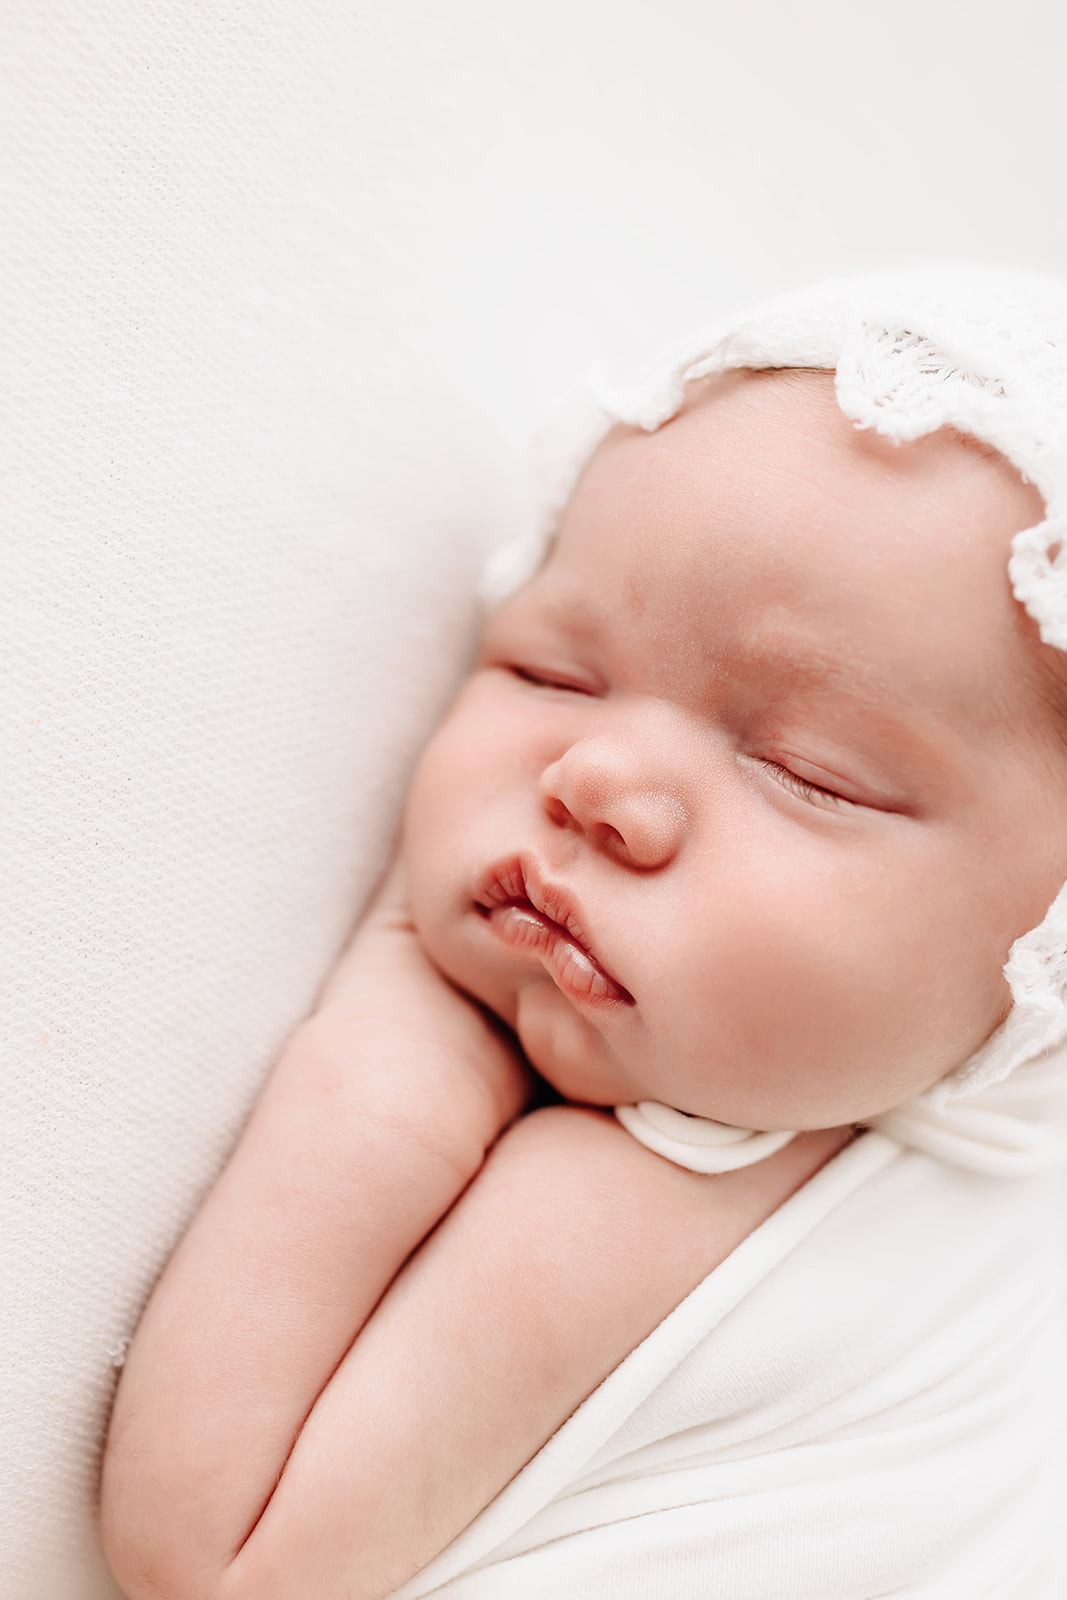 Details of a sleeping newborn baby St Louis Midwife